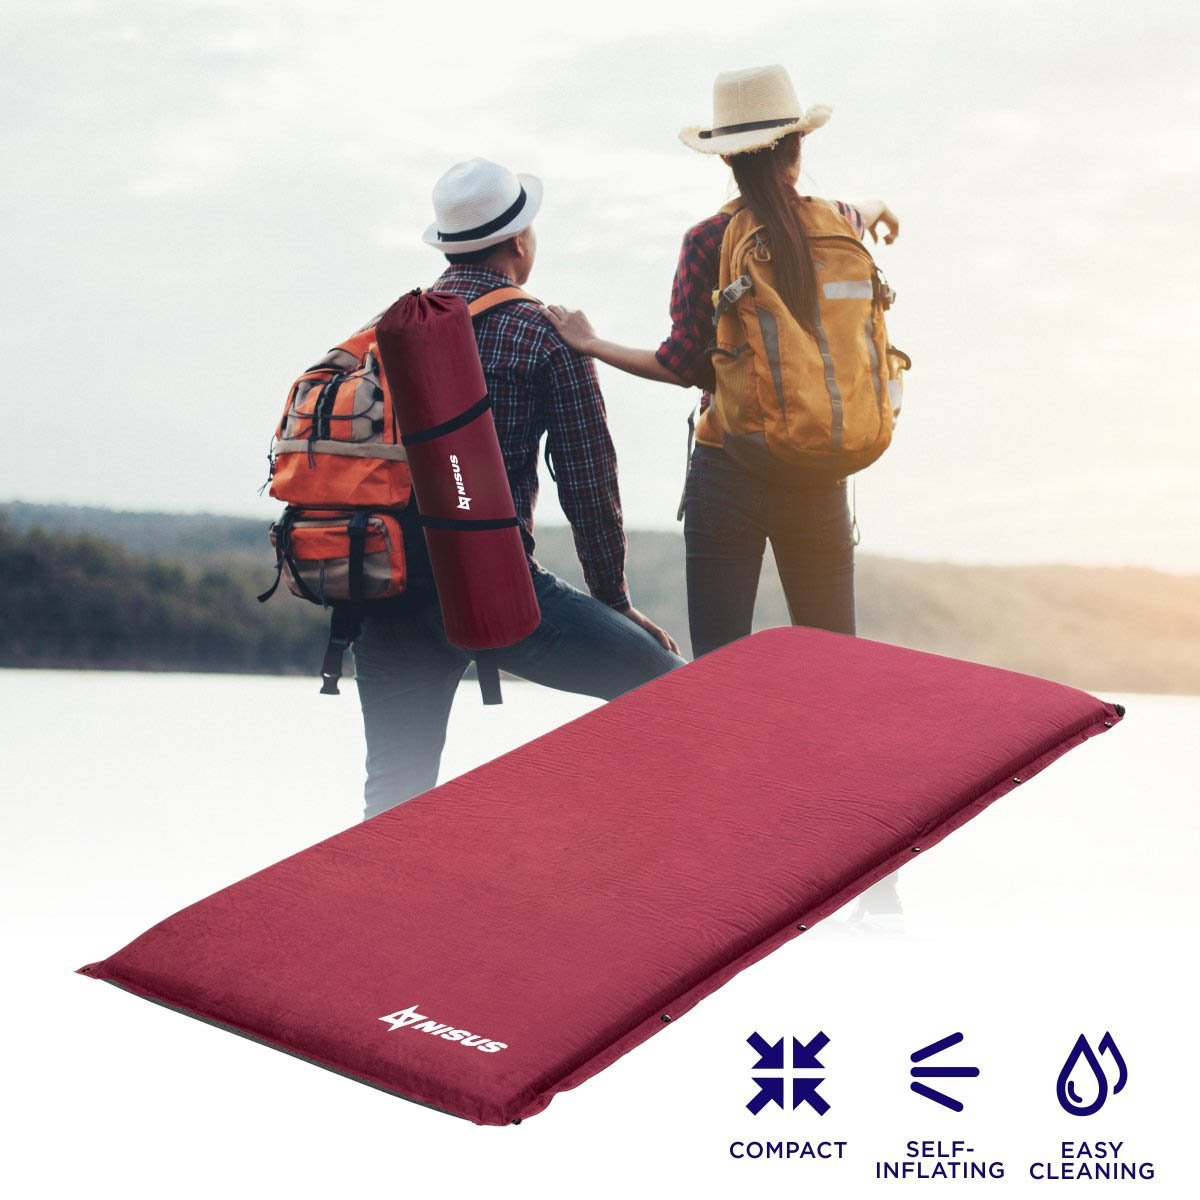 3-inch  Self Inflating Camping Sleeping Pad could be taken to any outdoor adventure